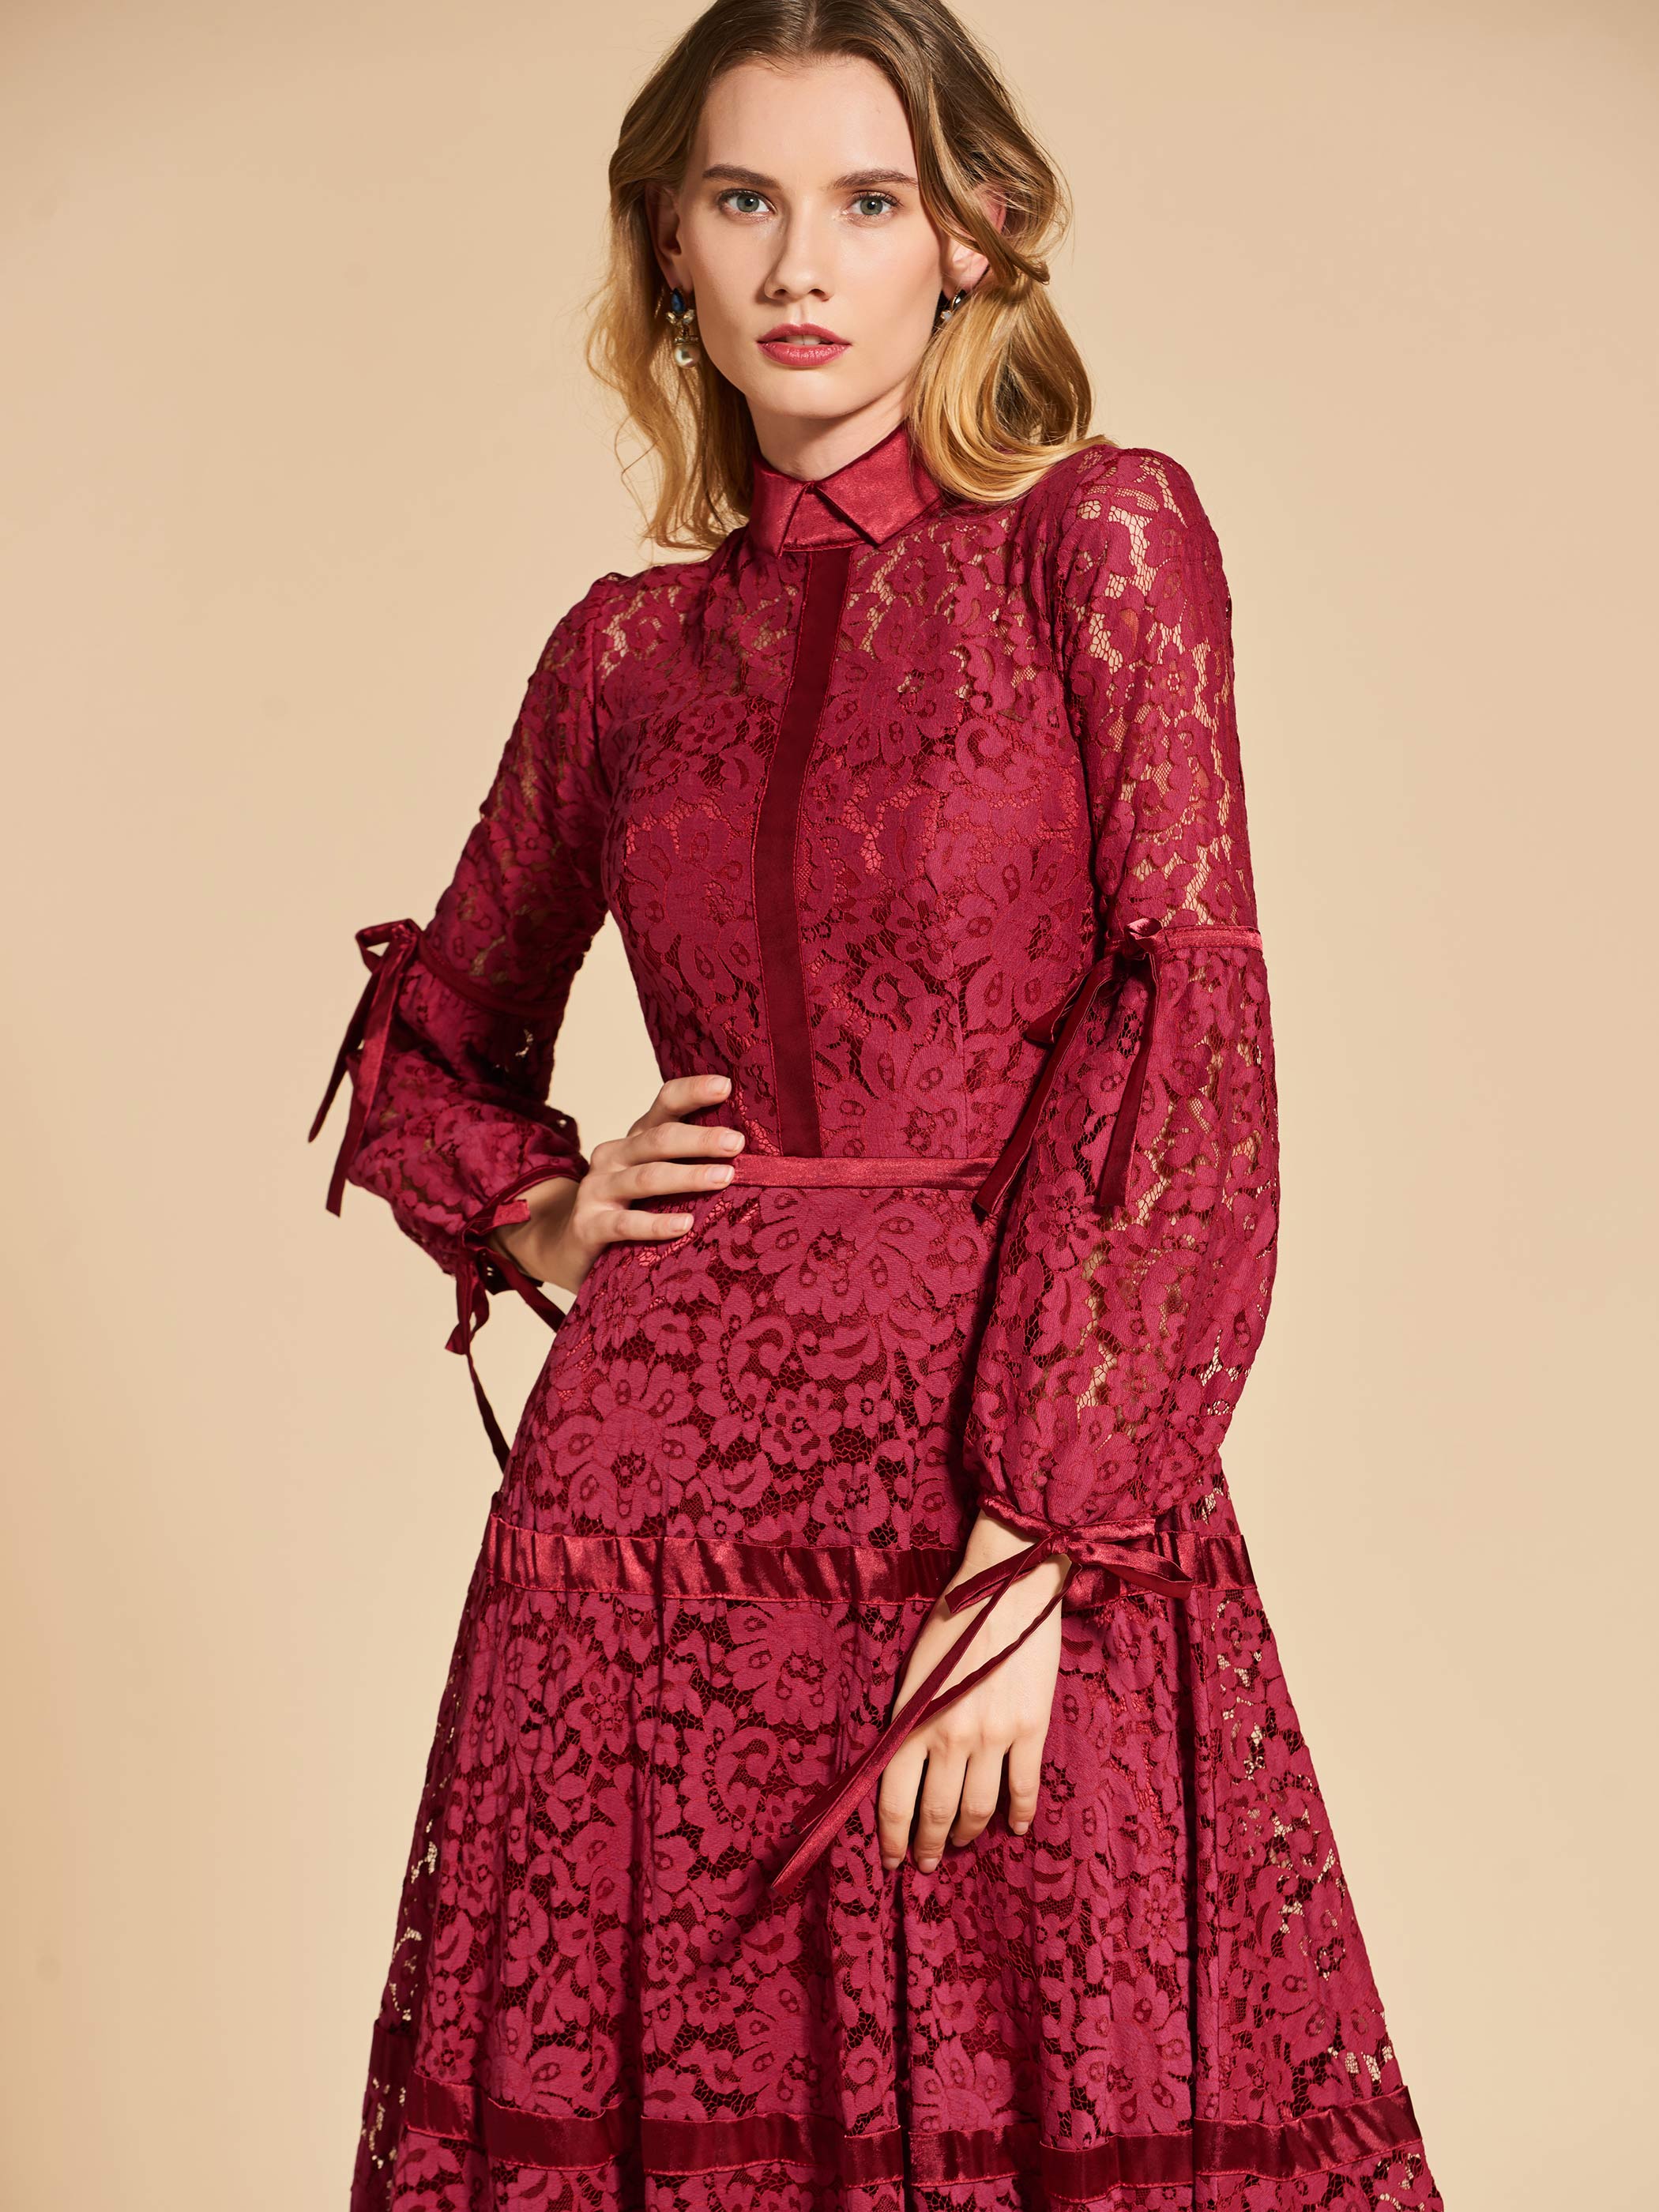 Ericdress Long Sleeves High Neck Vintage Lace Evening Dress